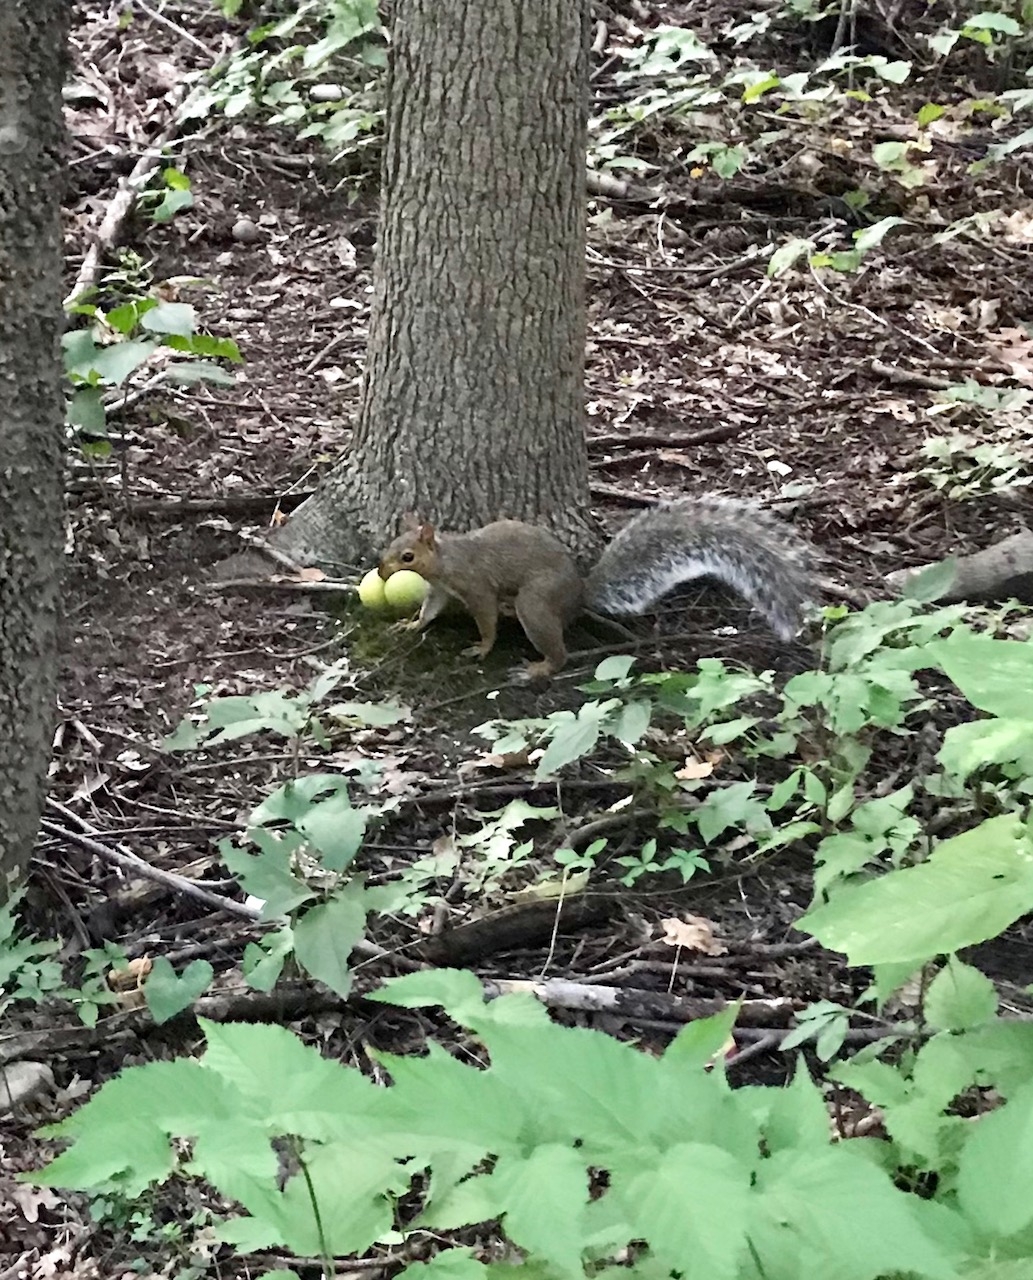 Foraging for black walnuts in Central Park